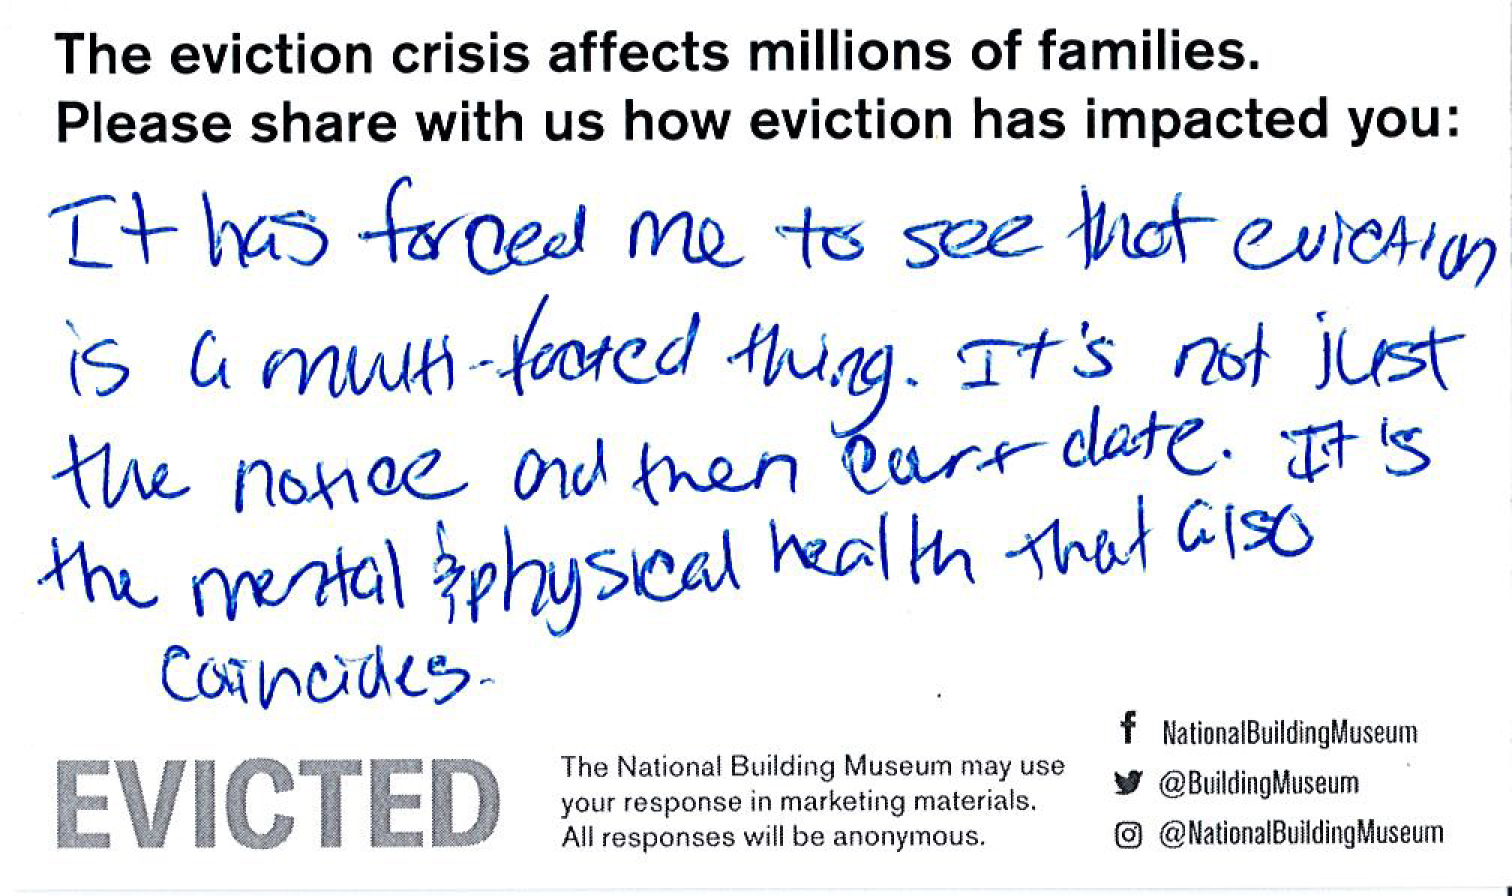 It has forced me to see that eviction is a multi-faceted thing. It’s not just the notice and the court case. It’s the mental & physical health that also coincides.